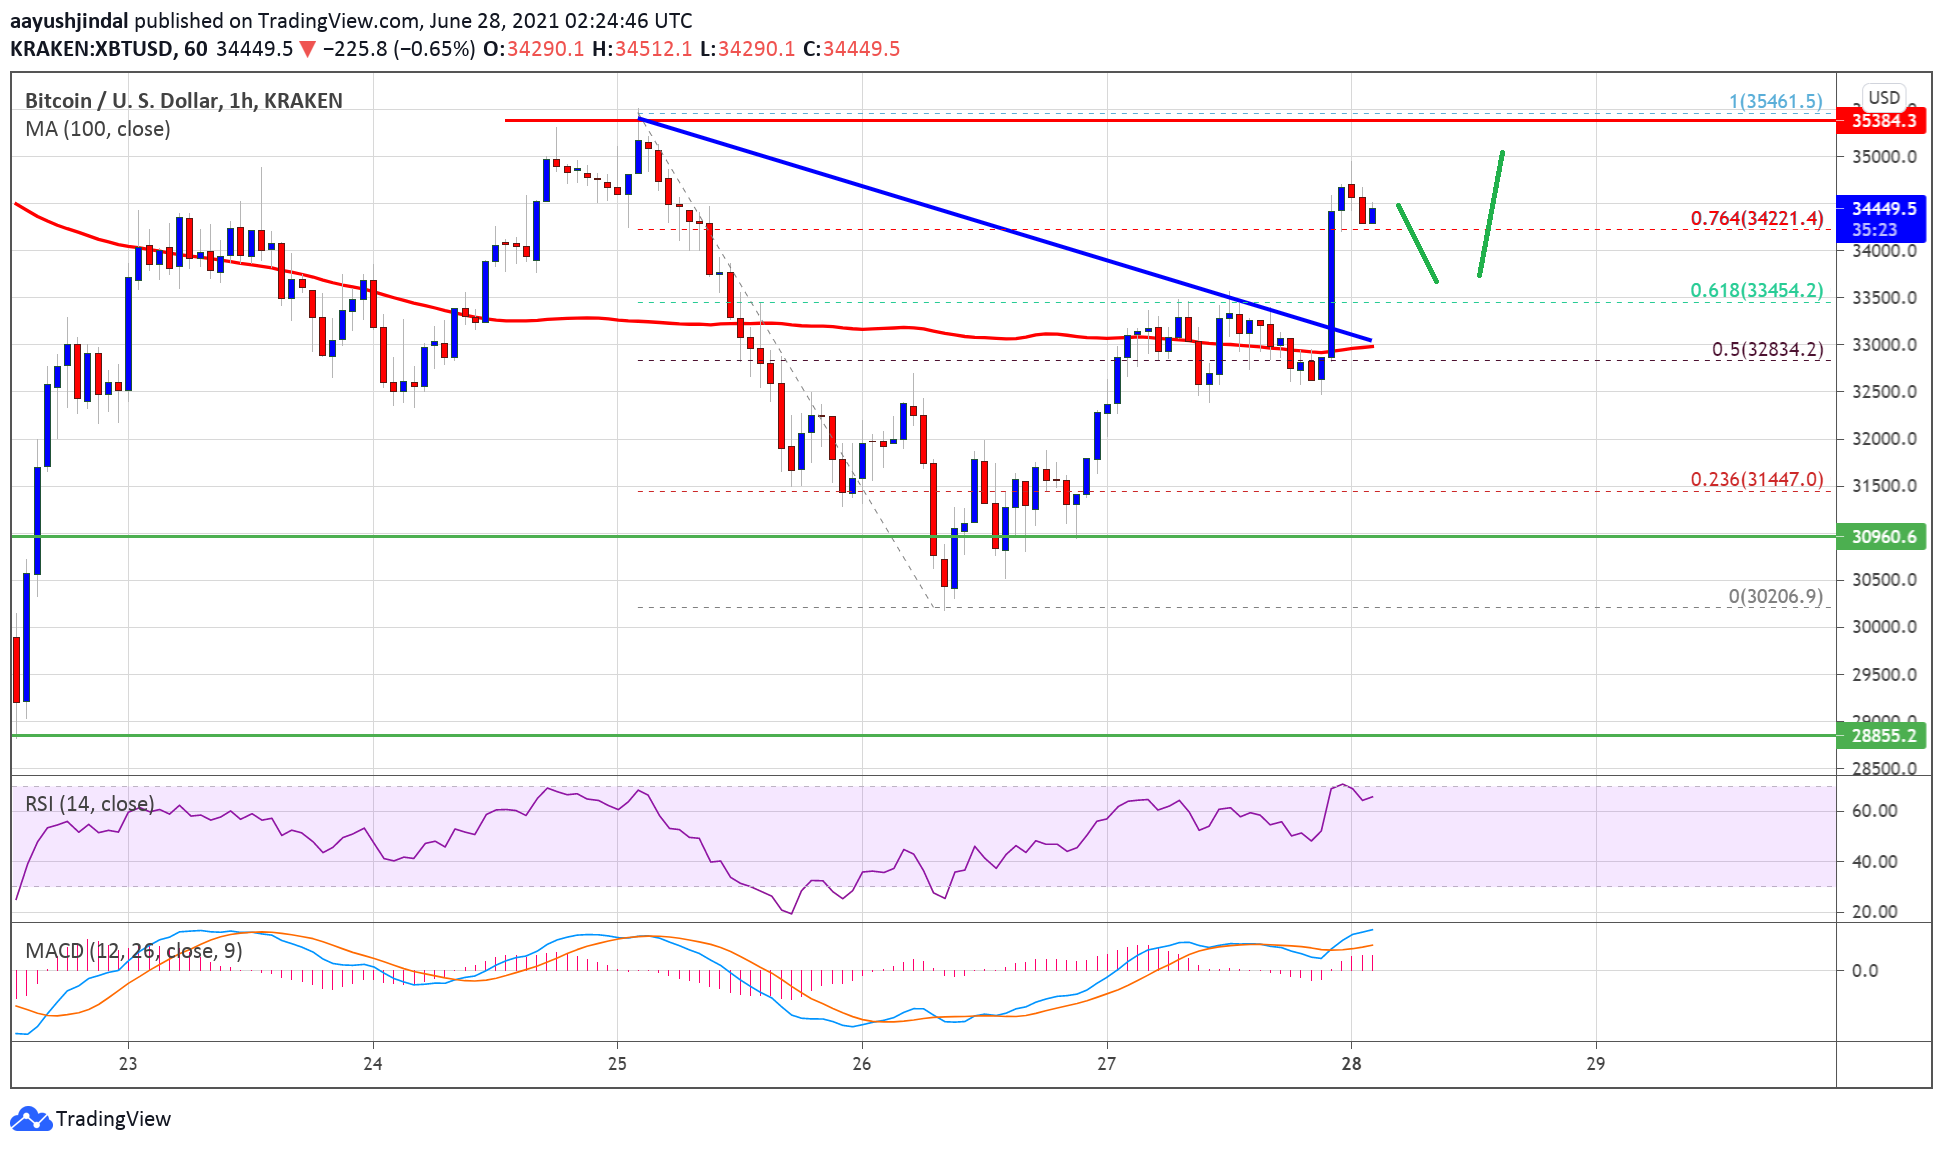 TA: Bitcoin Gains Traction, Why BTC Could Target Fresh High Above $35K